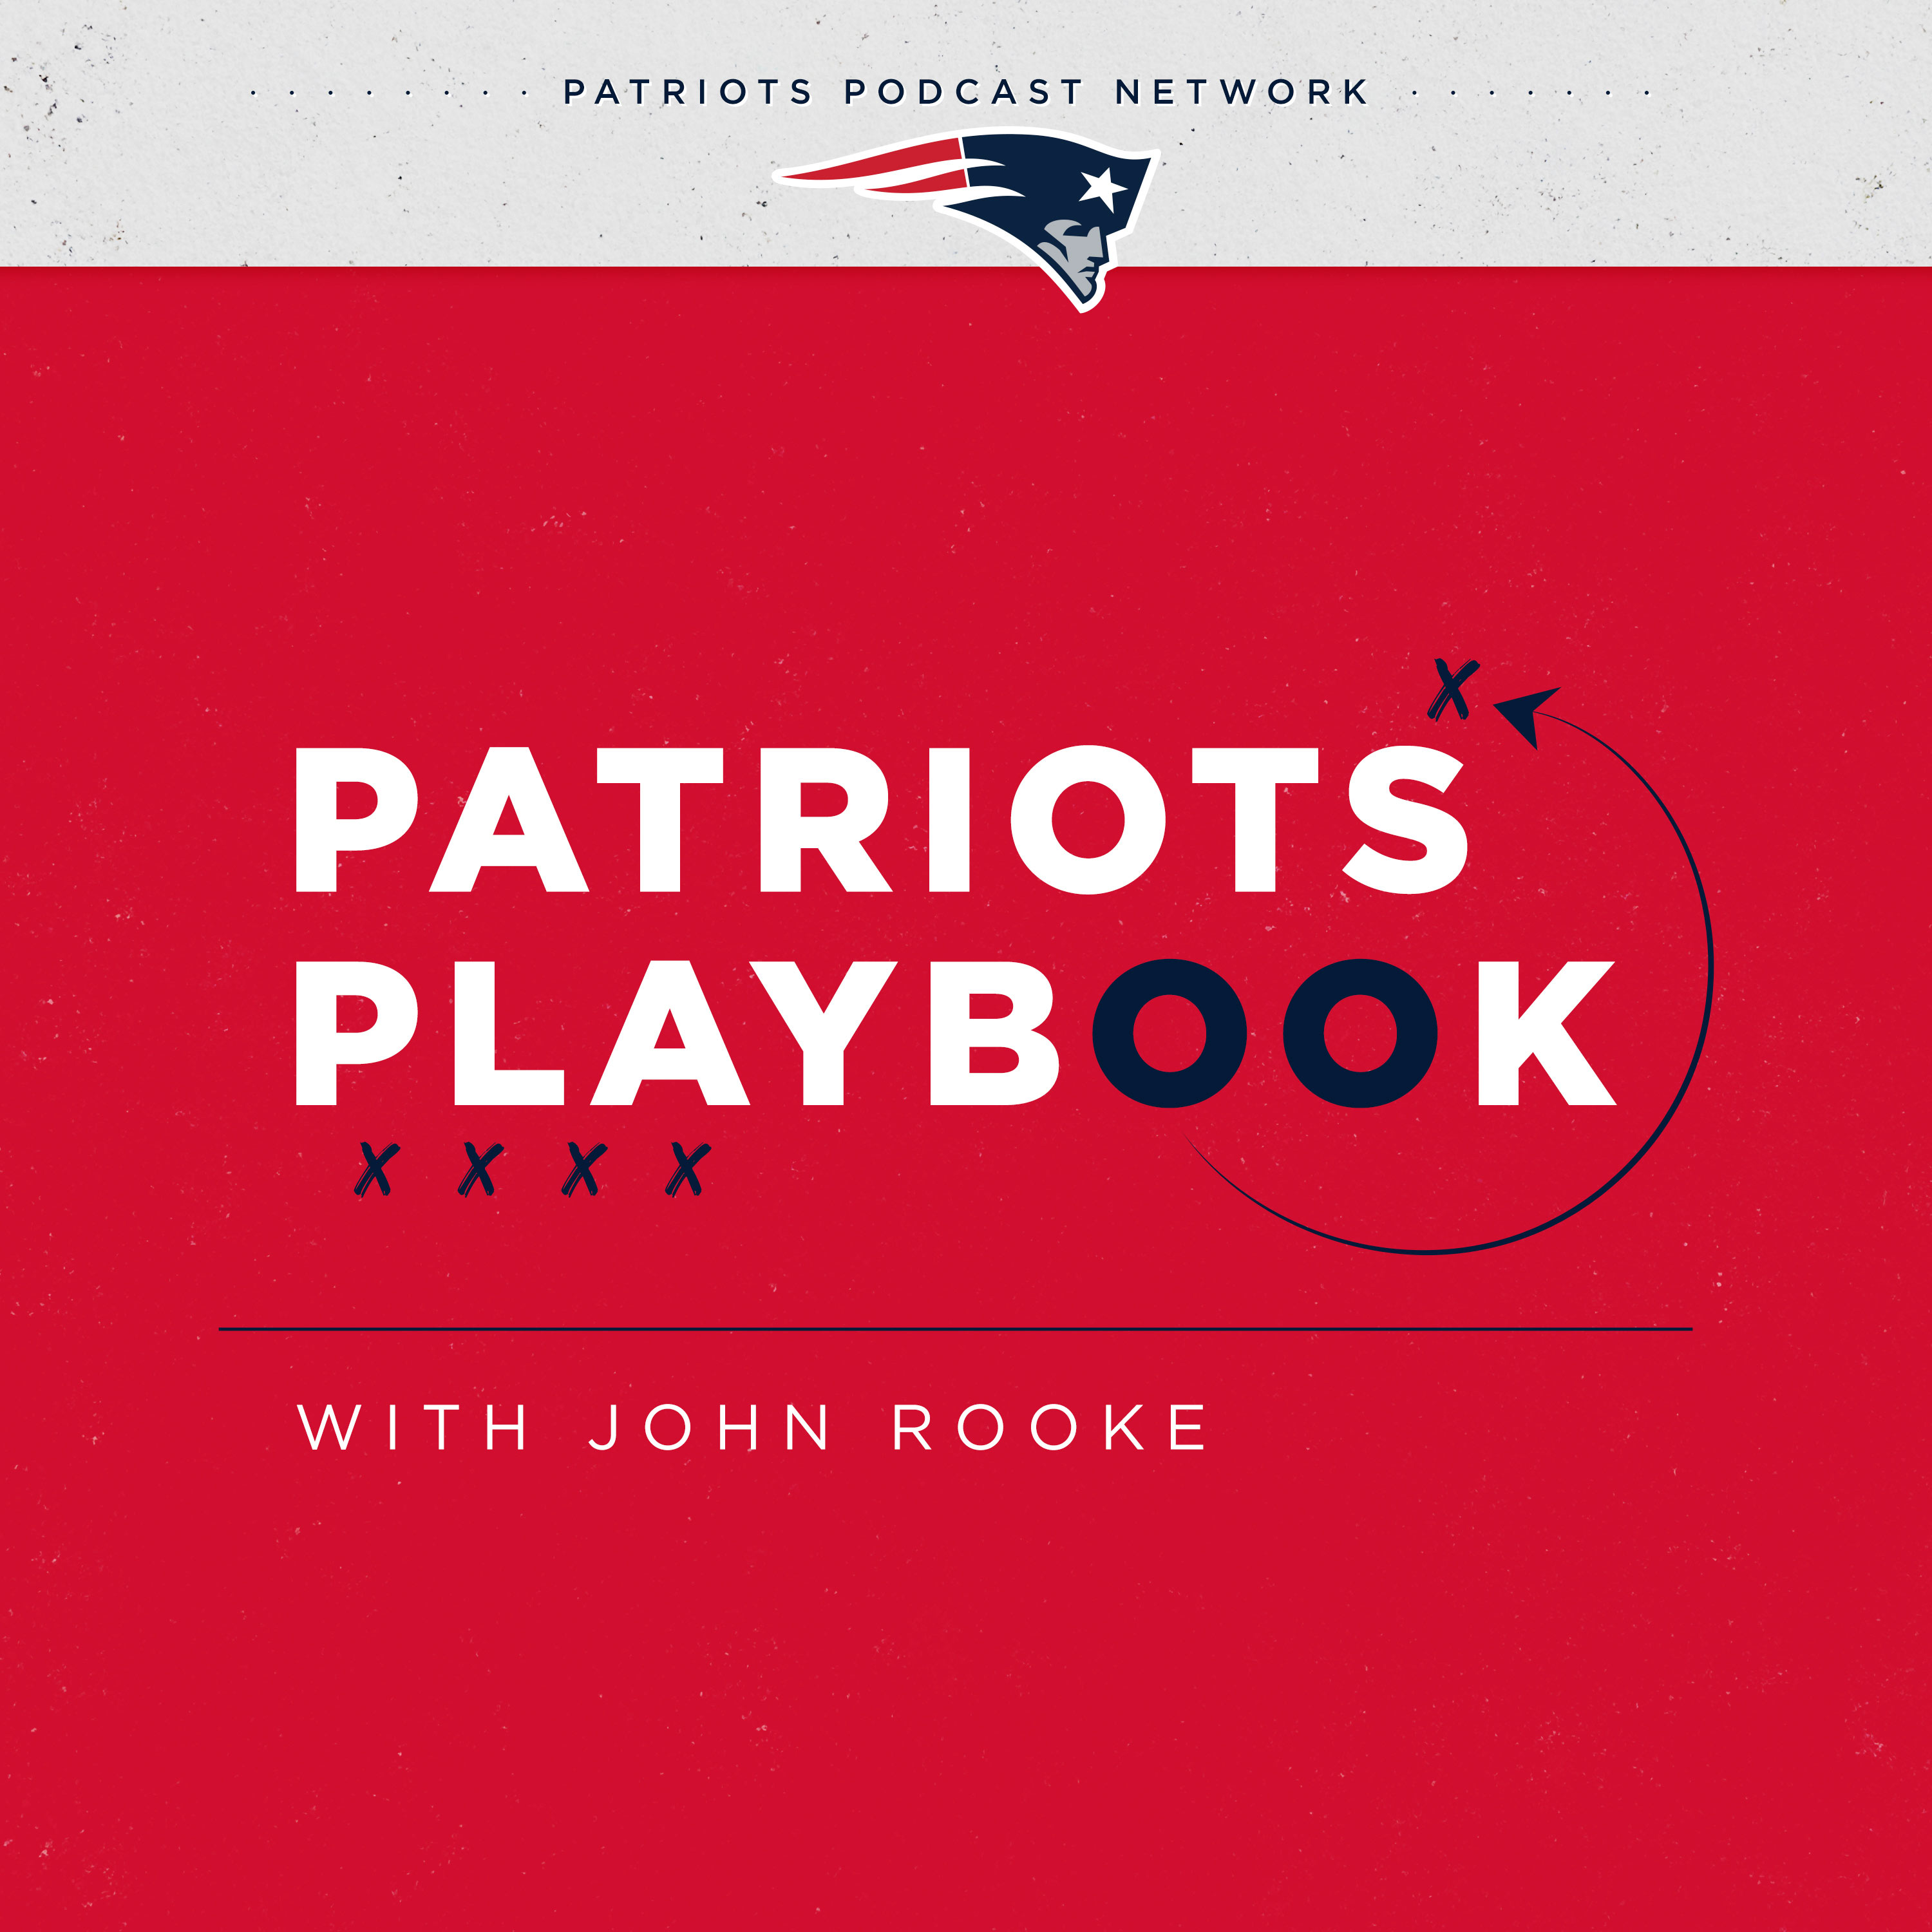 Patriots Playbook 11/10: Fan Roundtable, Biggest Surprise and Biggest Disappointment from First Half of Season, NFL Week 10 Predictions